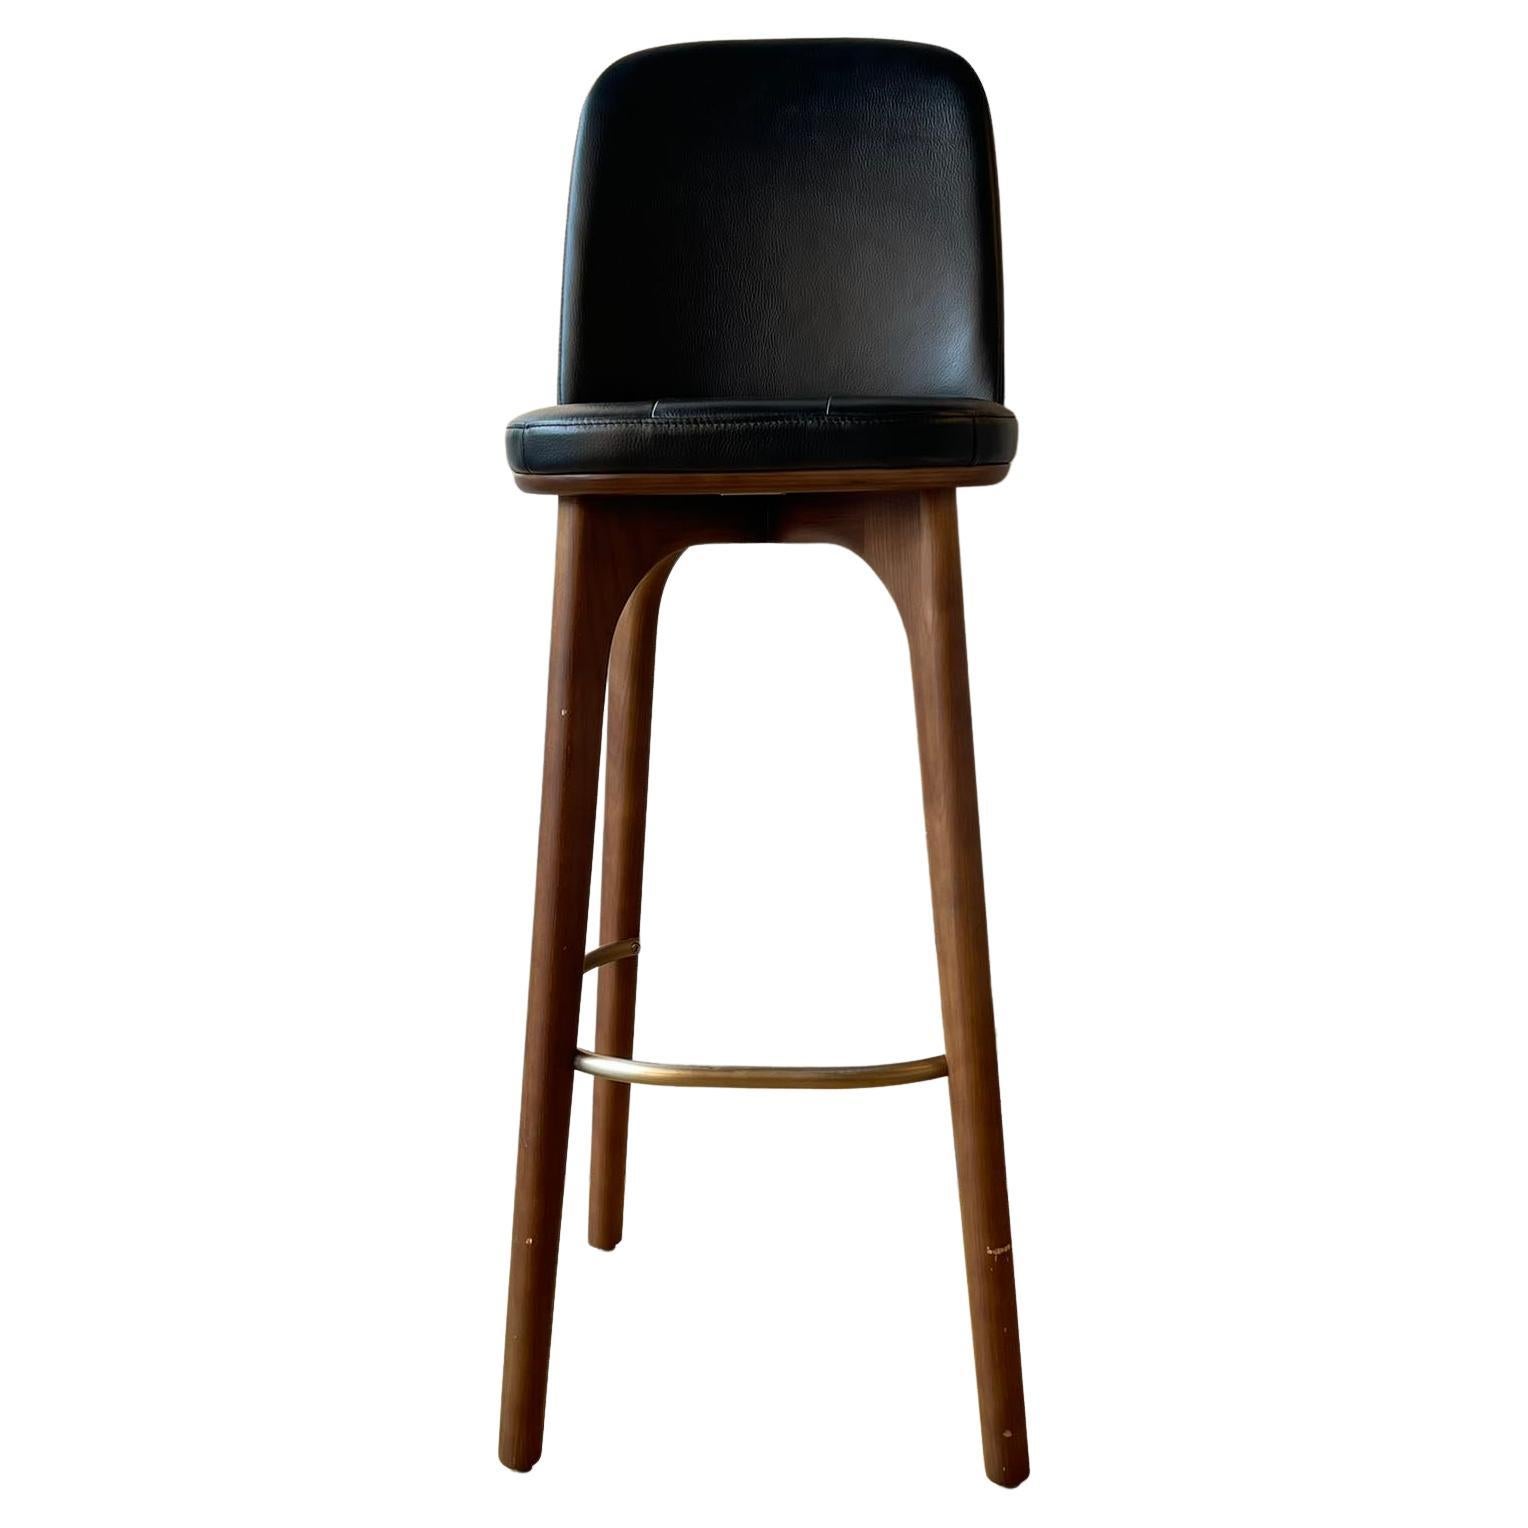 Walnut Stained Ash And Caress Black Leather Stool, Utility SH760 For Sale